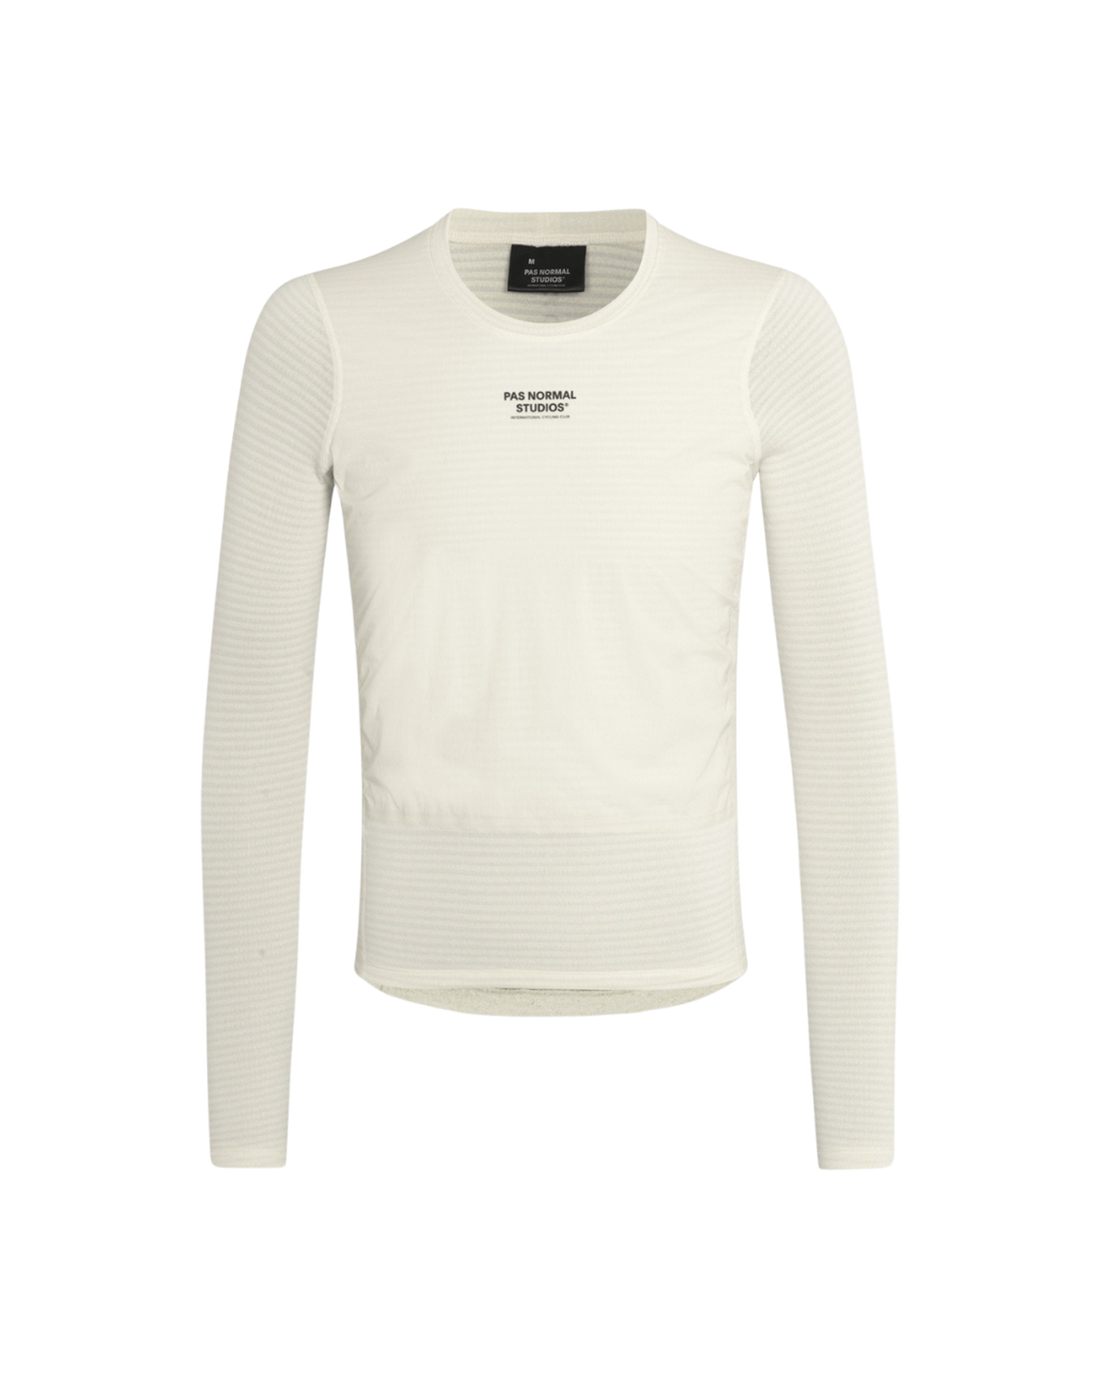 Thermal Windproof Base Layer - Off White